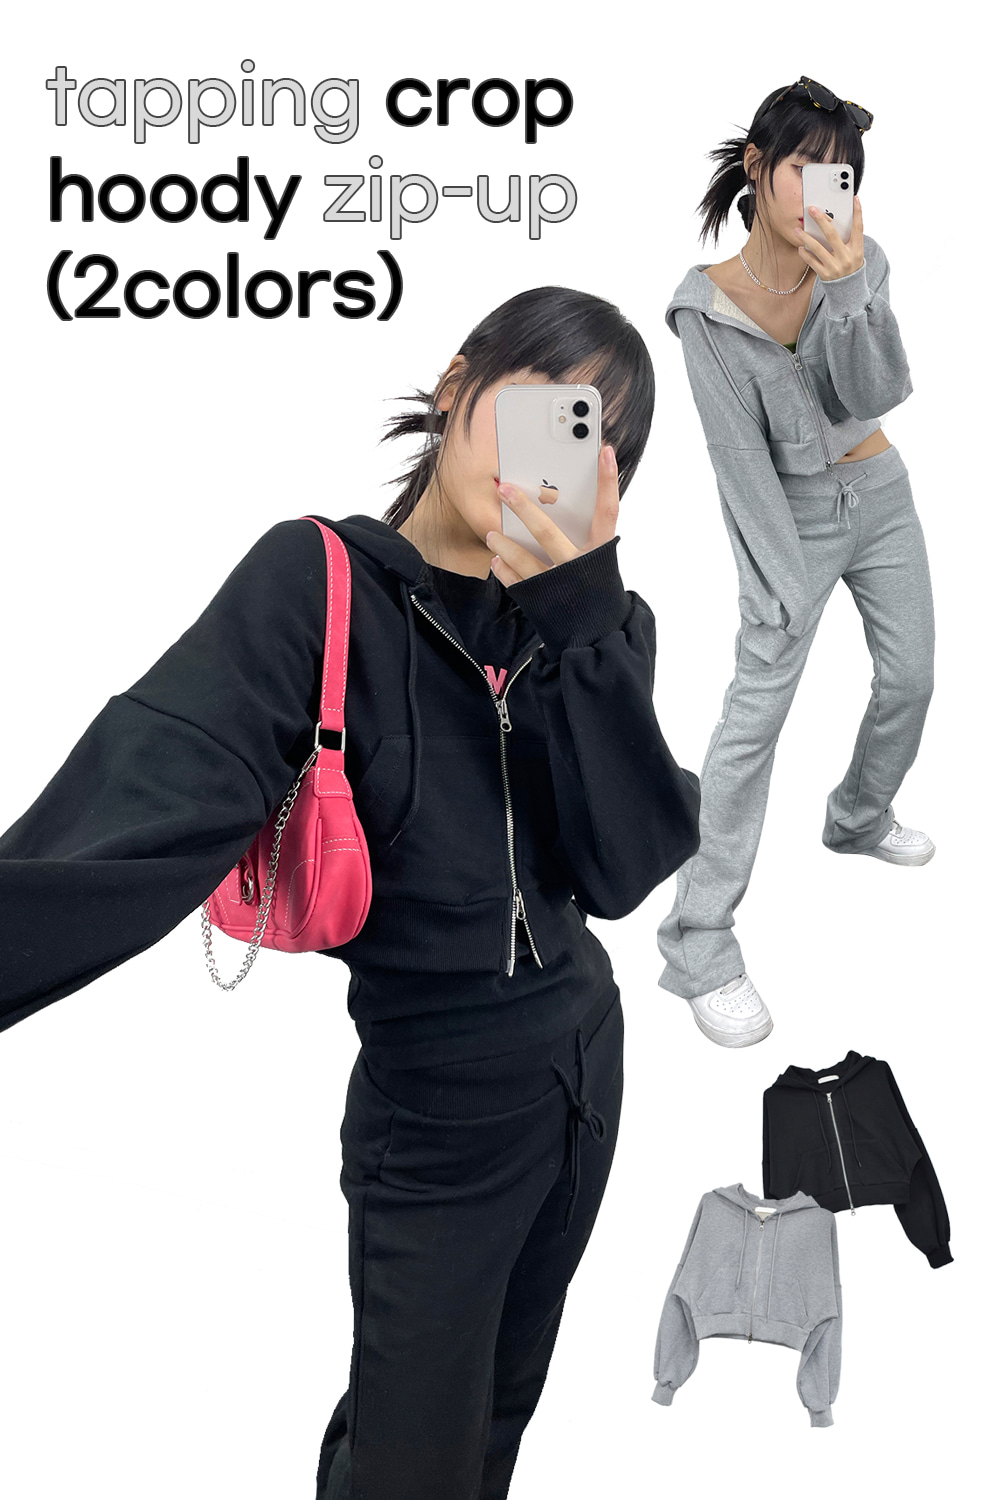 tapping crop hoody zip-up (2colors)